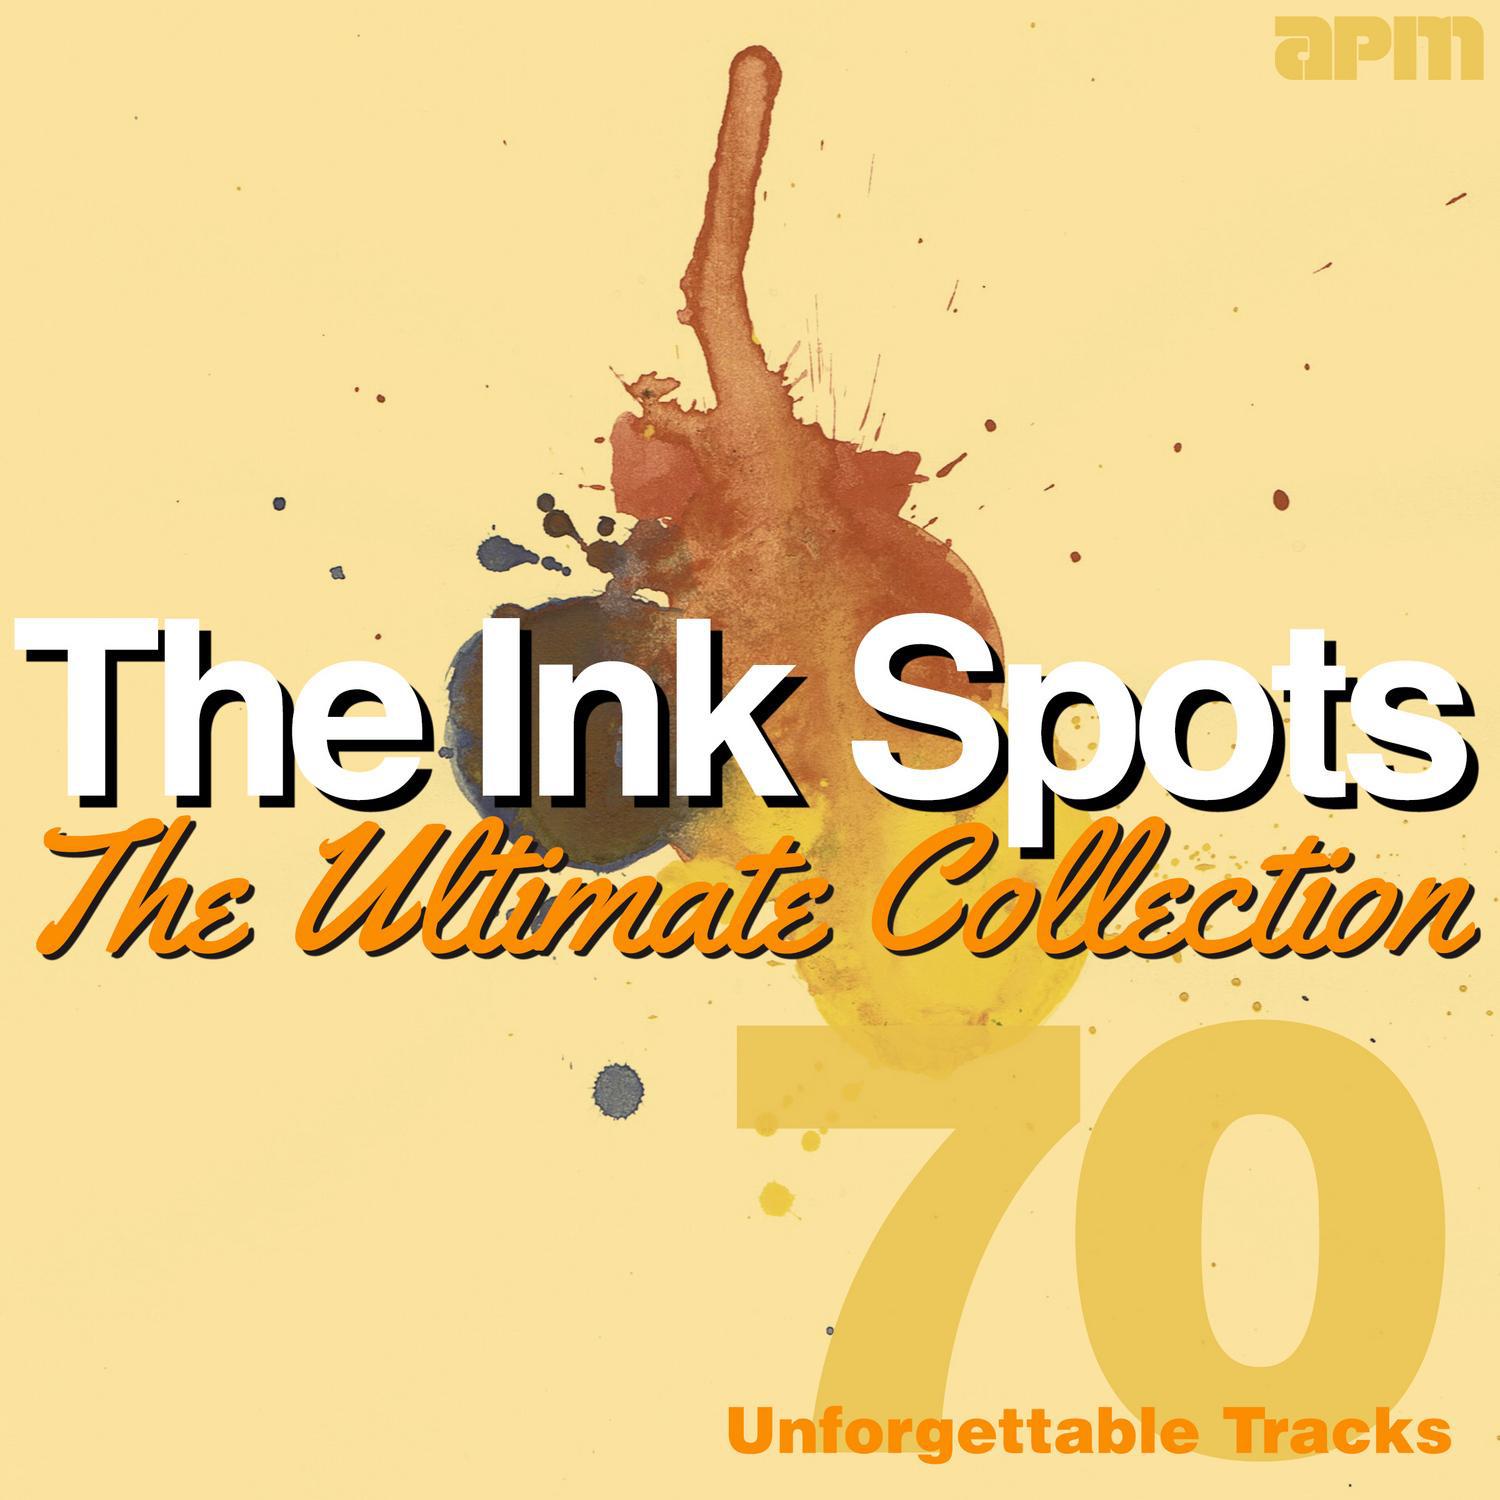 The Ultimate Collection - 70 Unforgettable Tracks